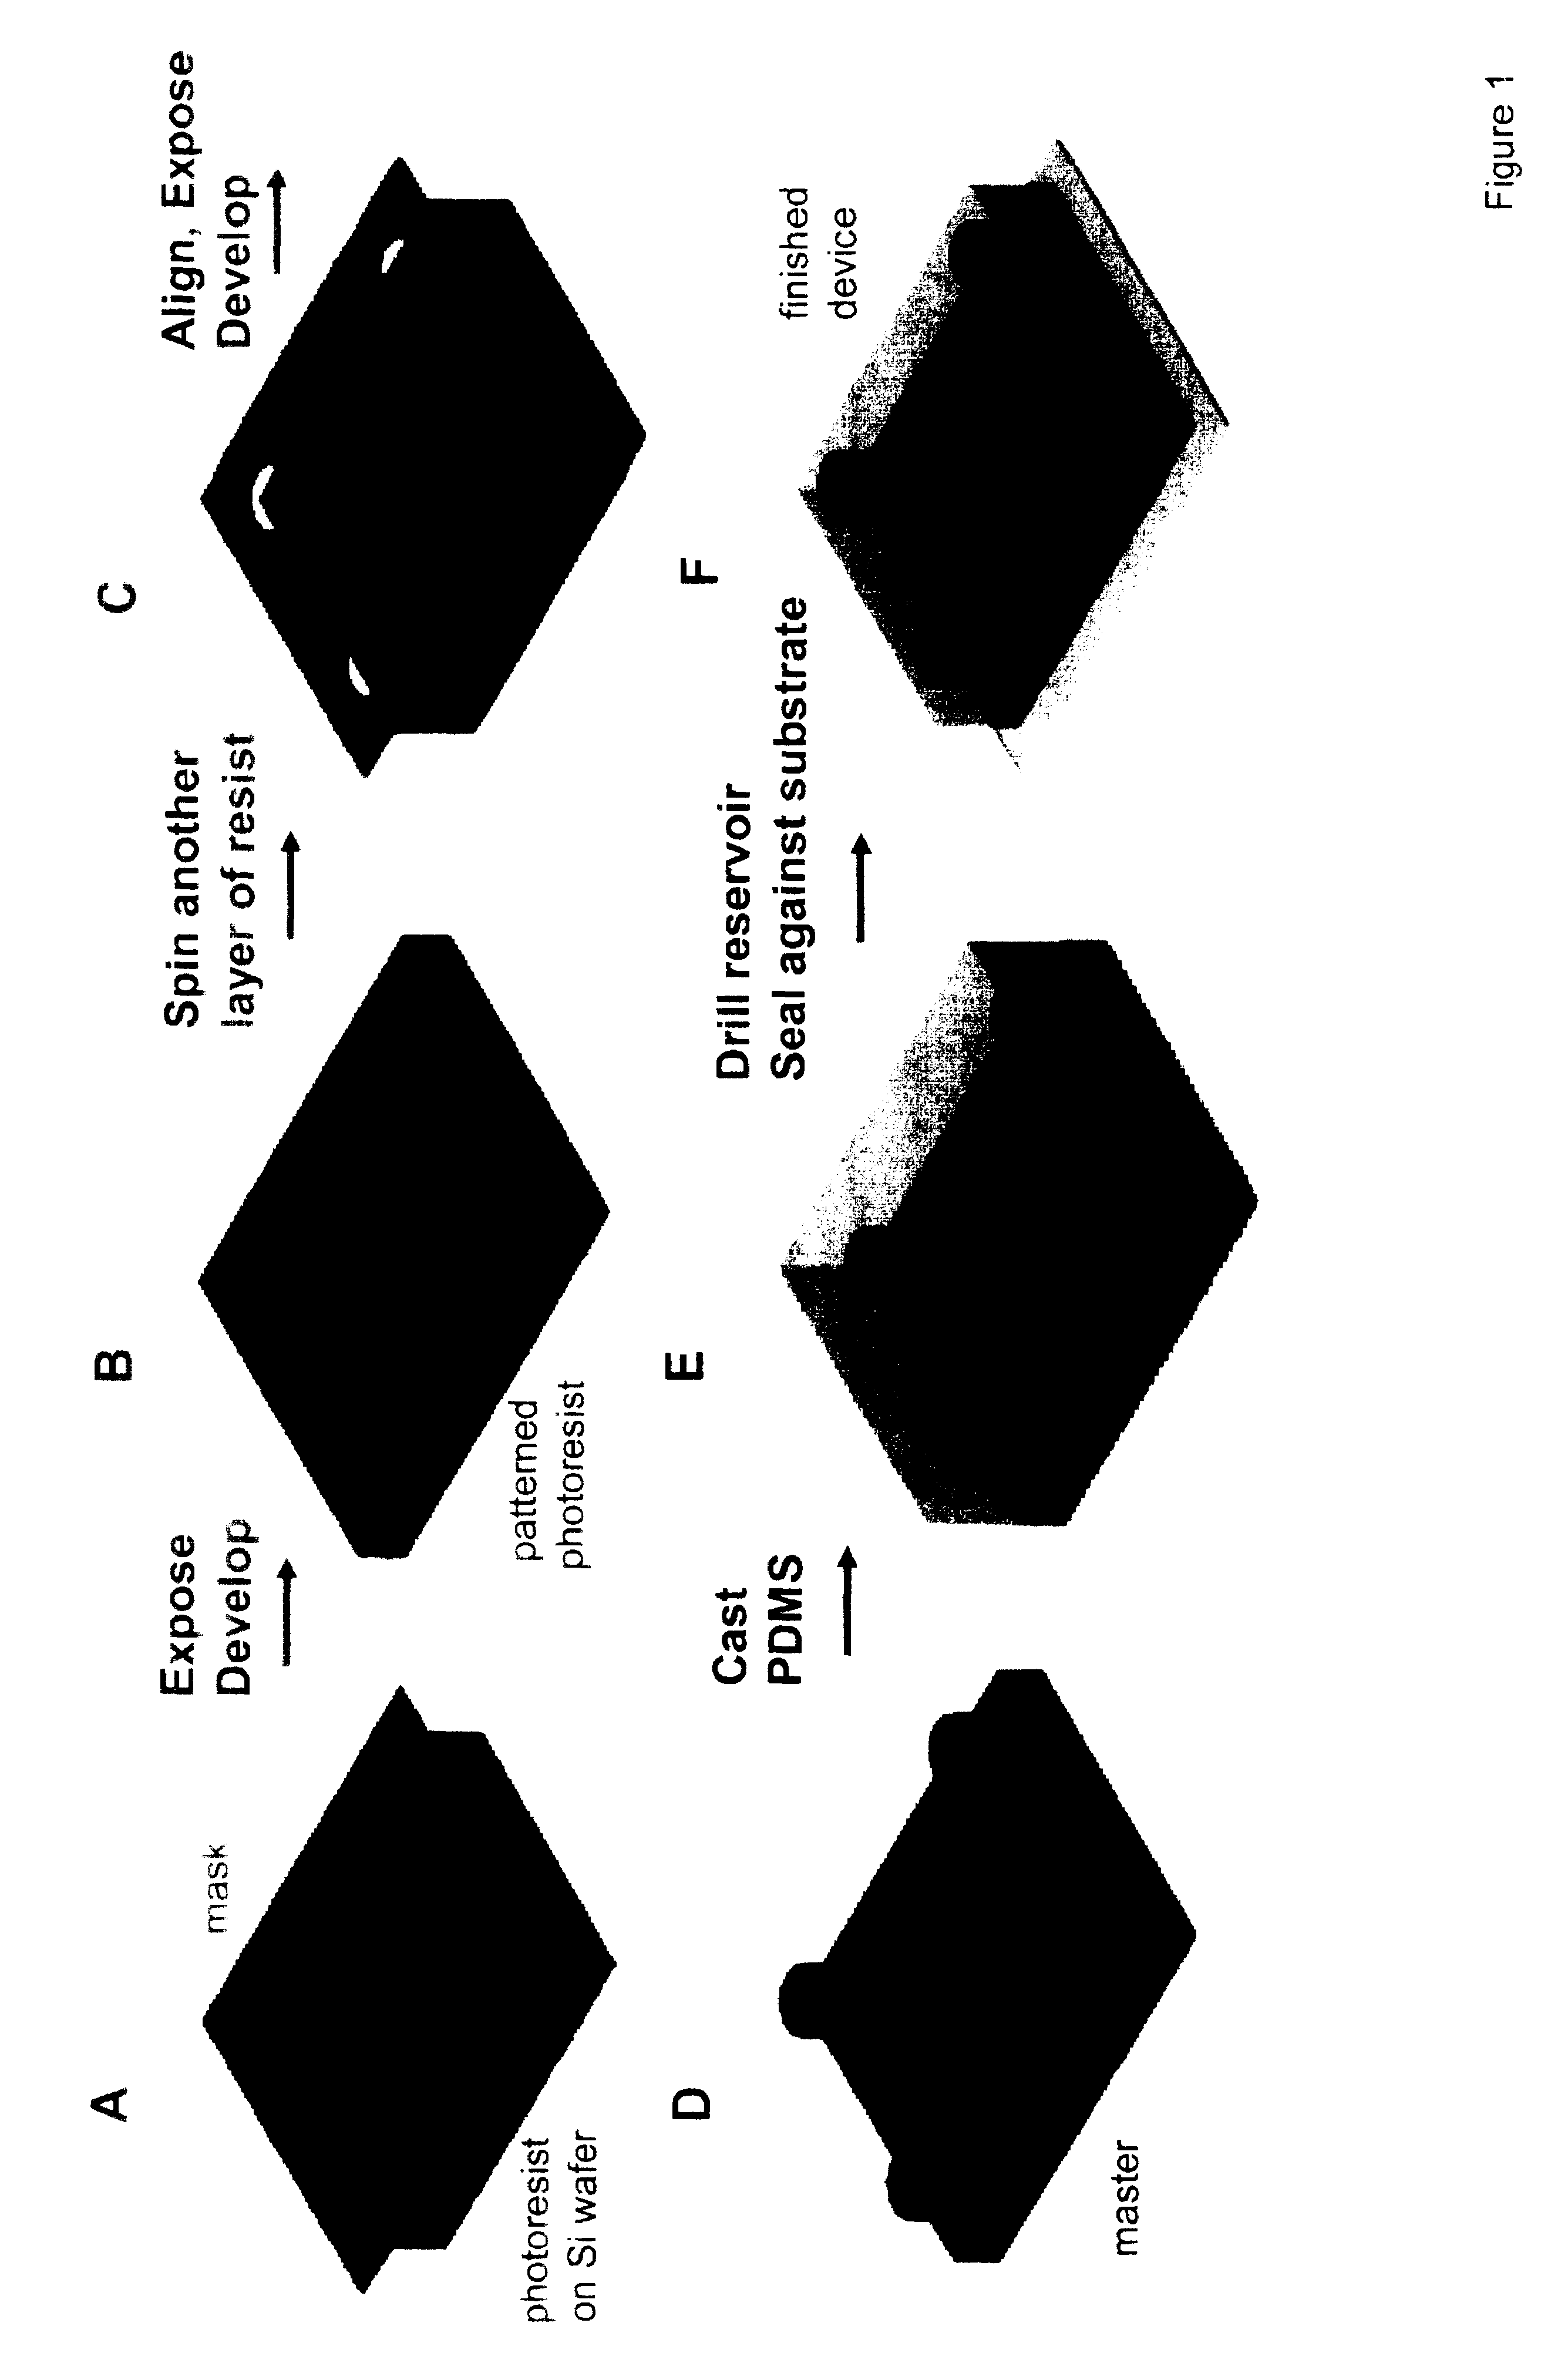 Microfluidic device for enabling fluidic isolation among interconnected compartments within the apparatus and methods relating to same